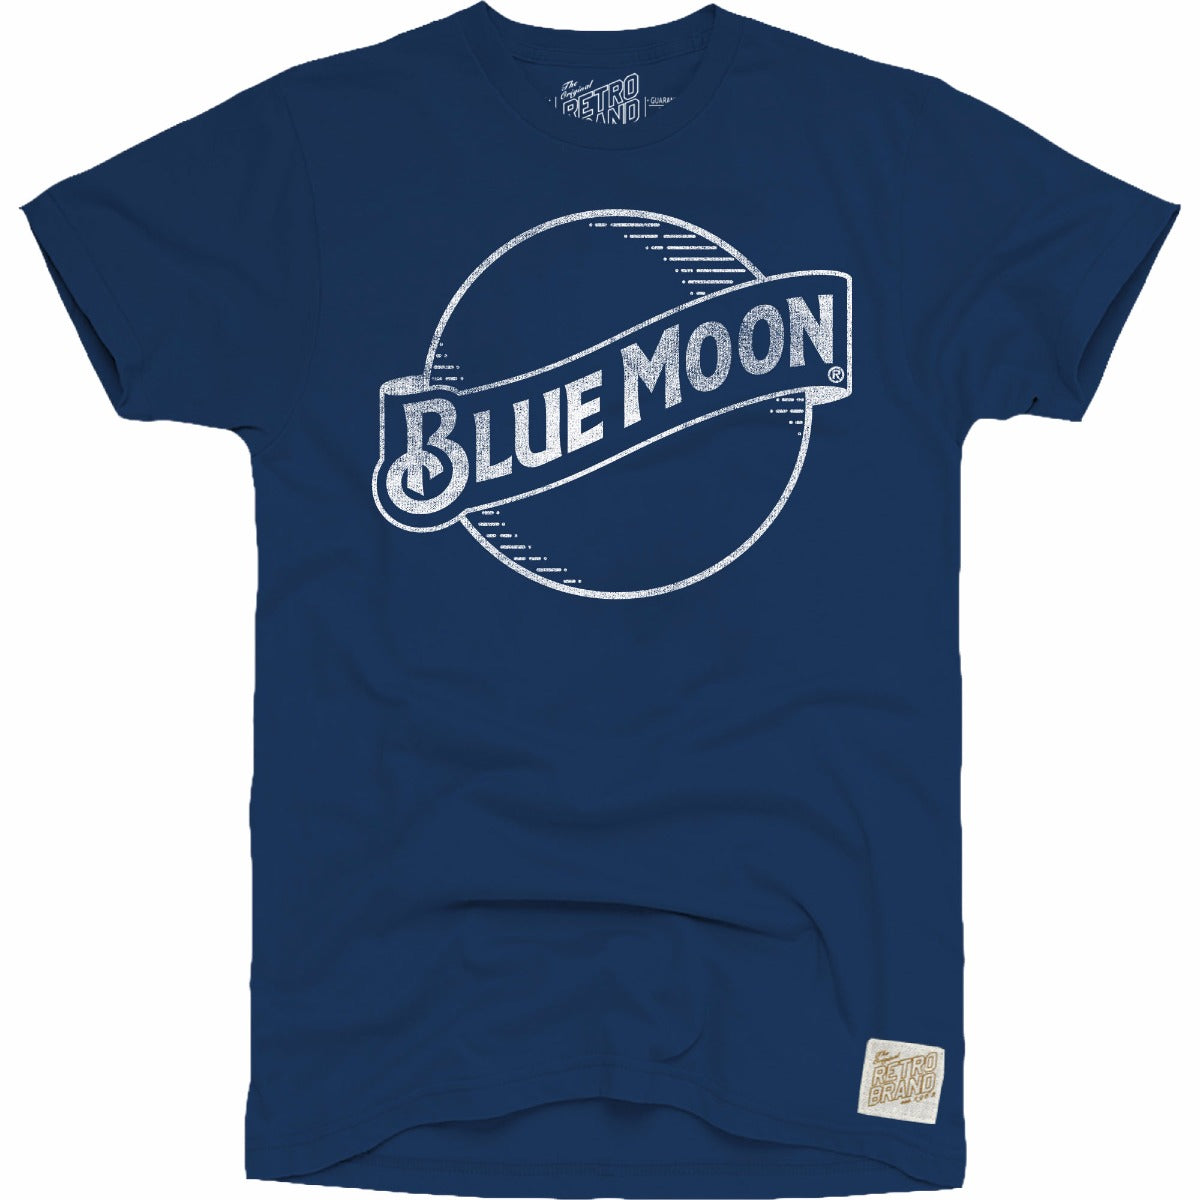 Blue Moon logo in white on our 100% cotton unisex tee in navy